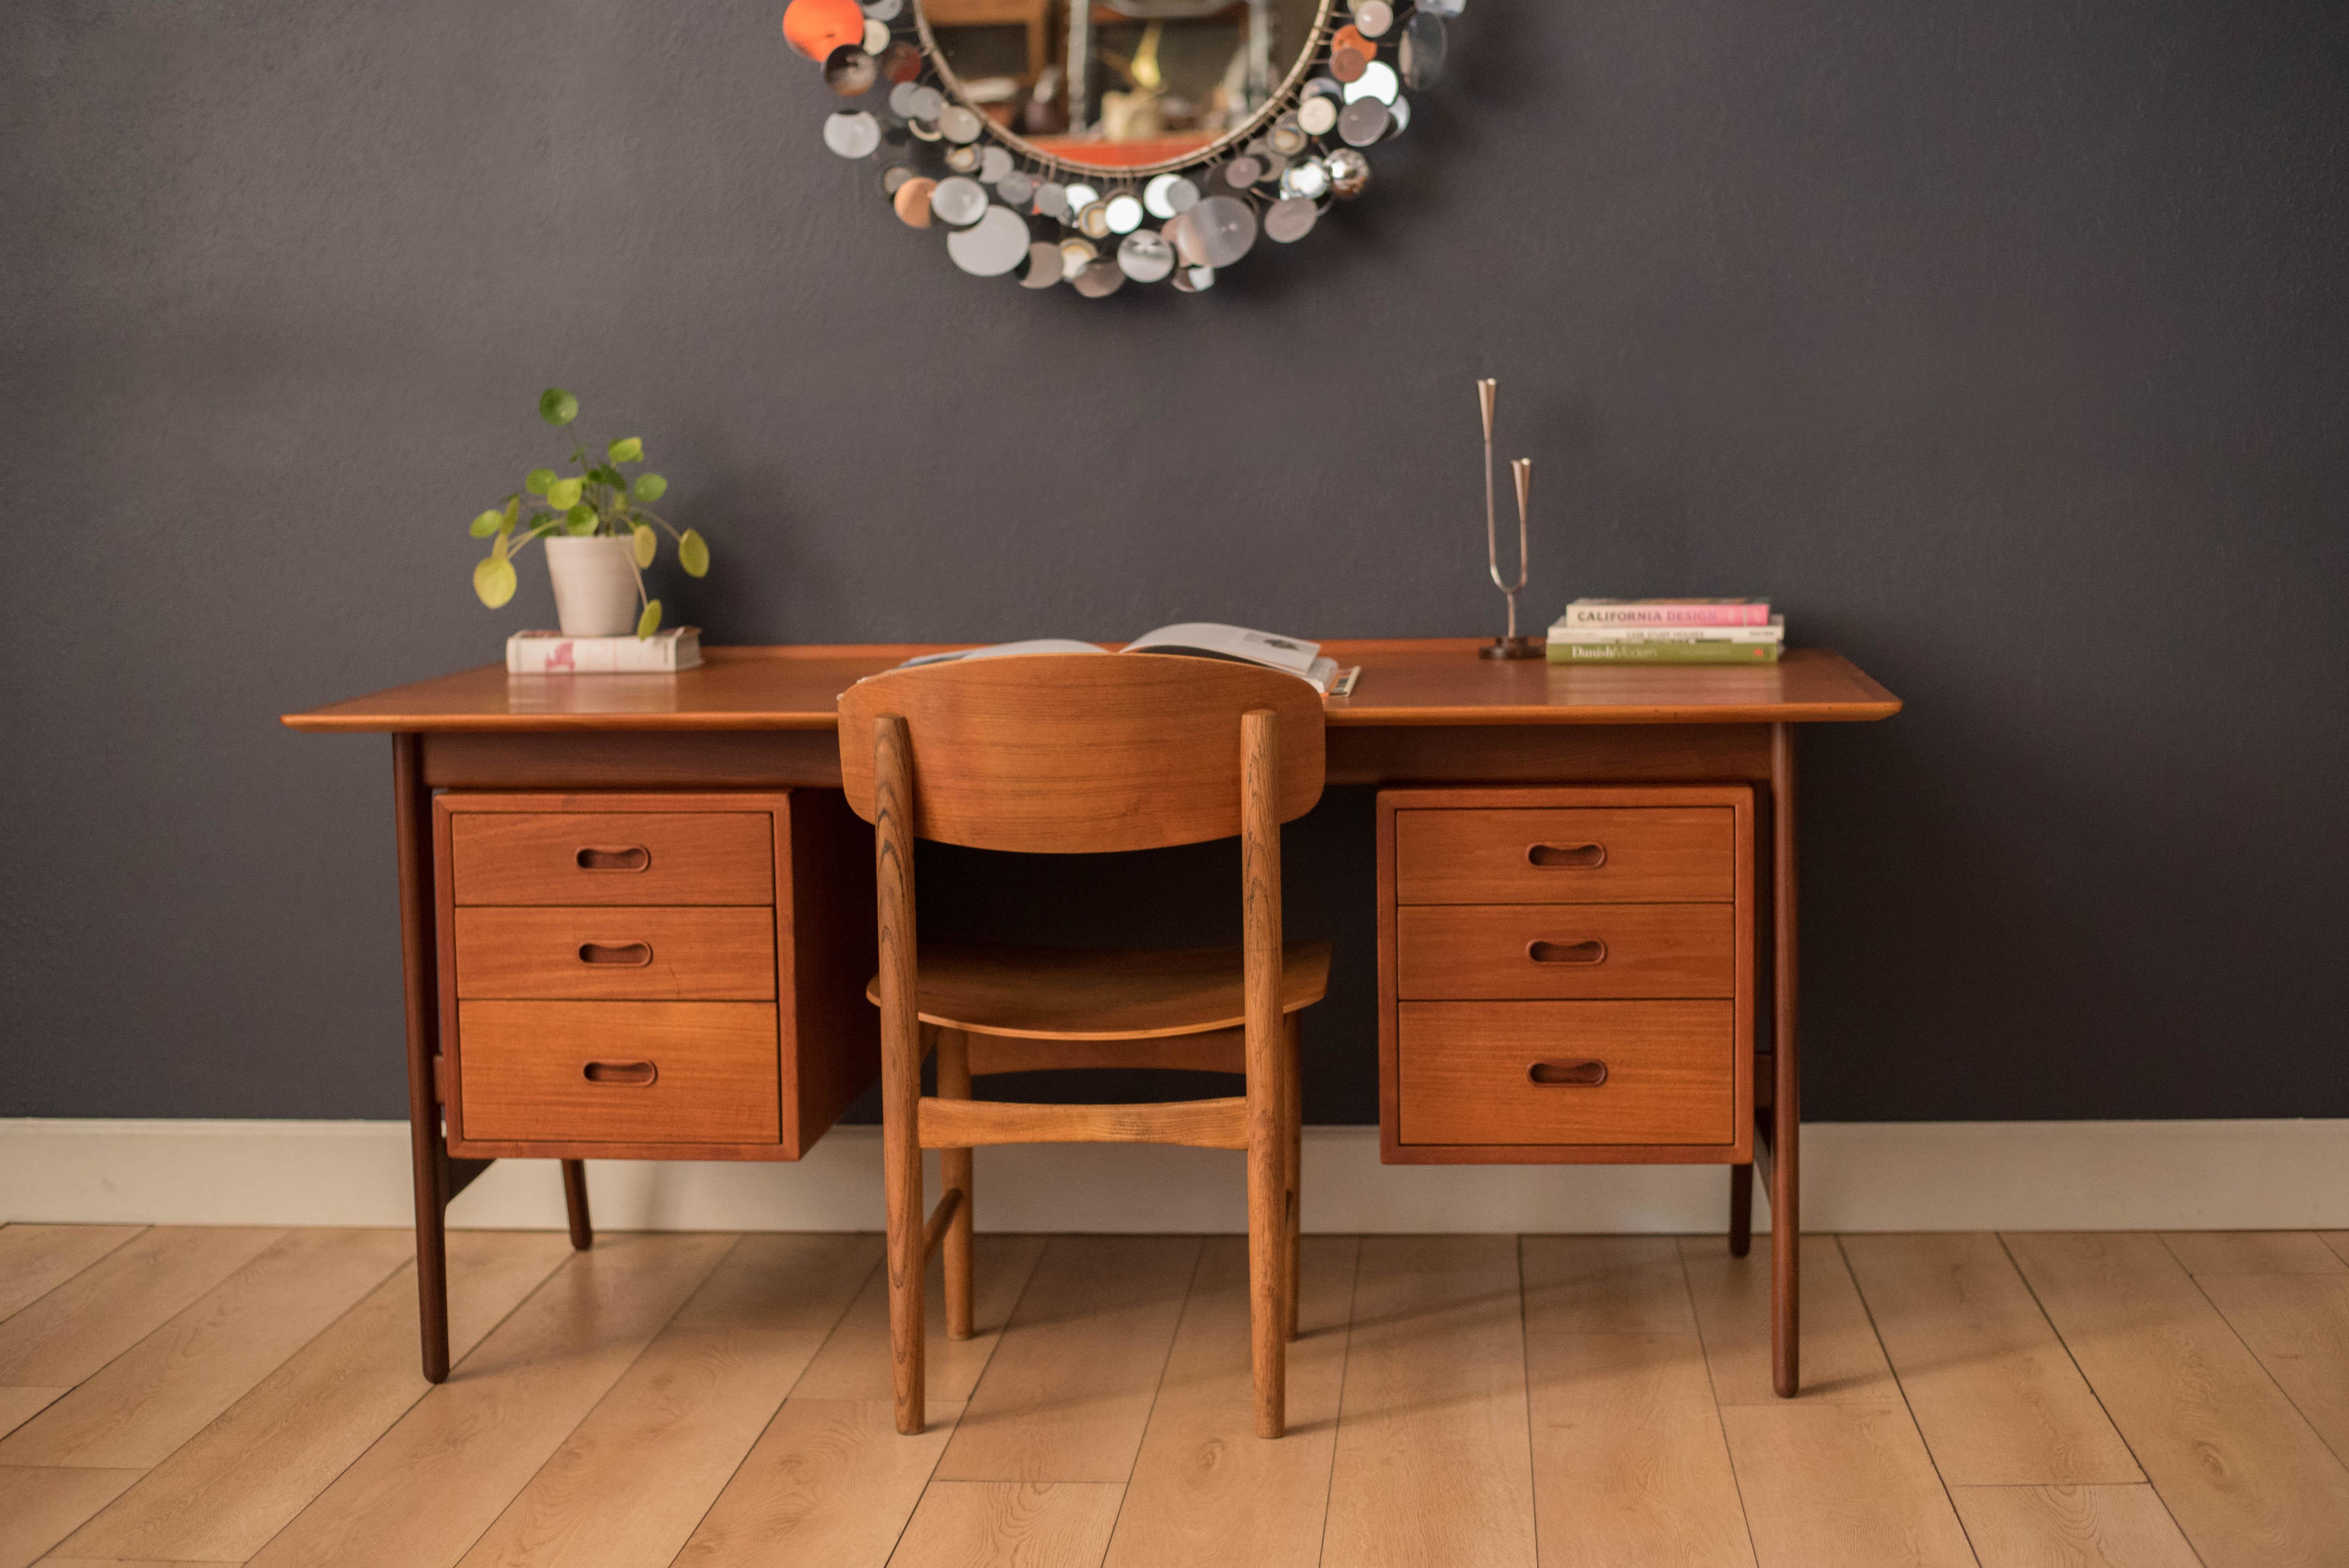 Mid-Century Modern executive desk in teak designed by Arne Vodder for Vamo Sonderborg, Denmark. Features a unique floating top with a raised lip edge and external supporting legs. This piece includes six dovetailed drawers accented with solid wood